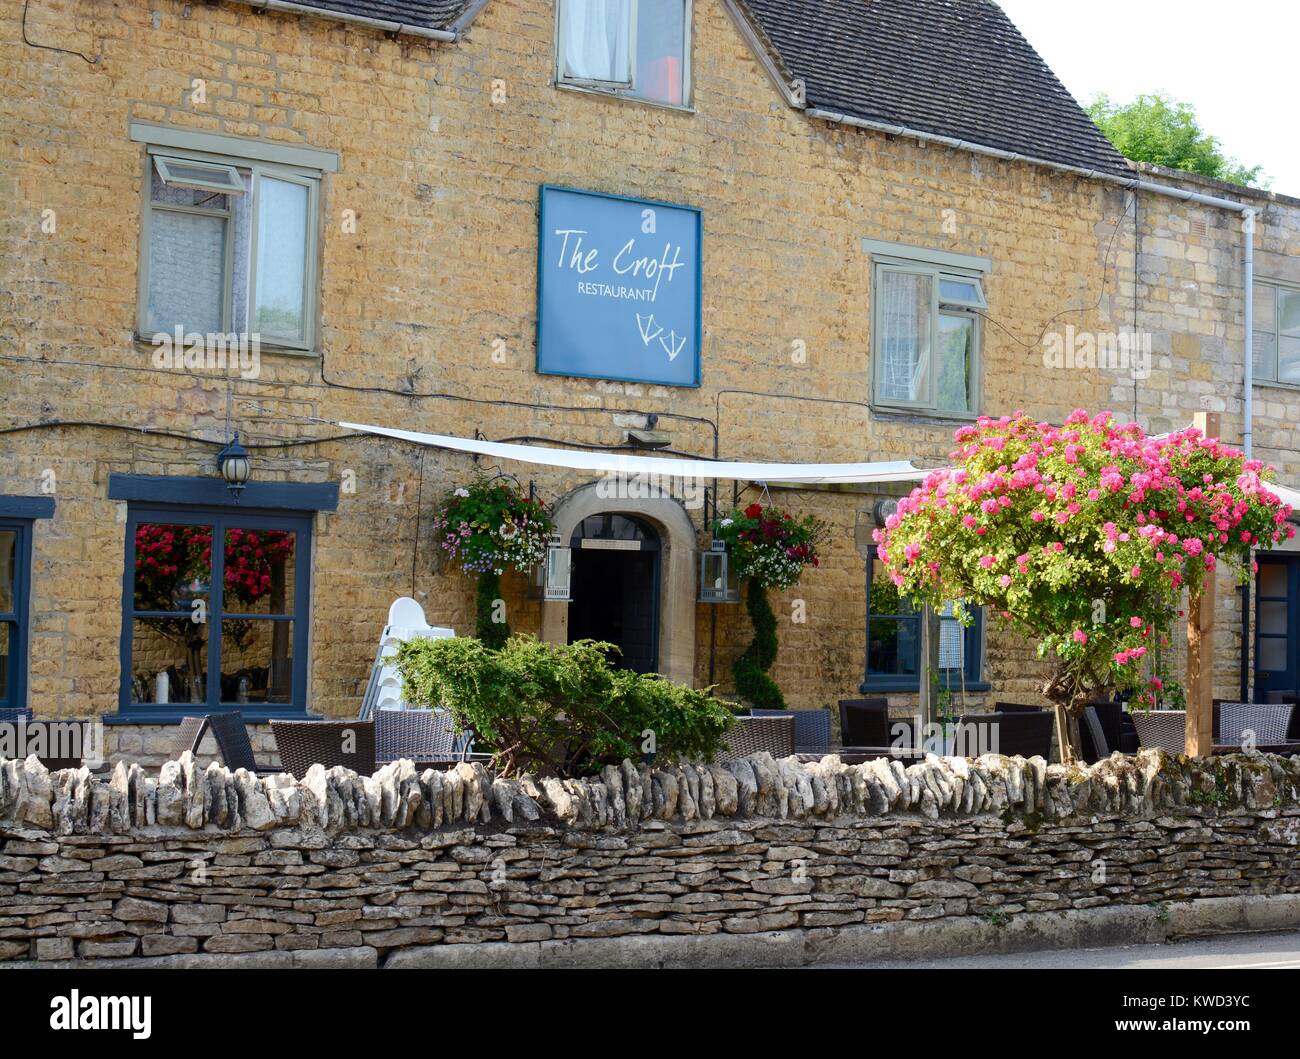 The croft restaurant, Bourton on the water, Cotswolds, UK Stock Photo